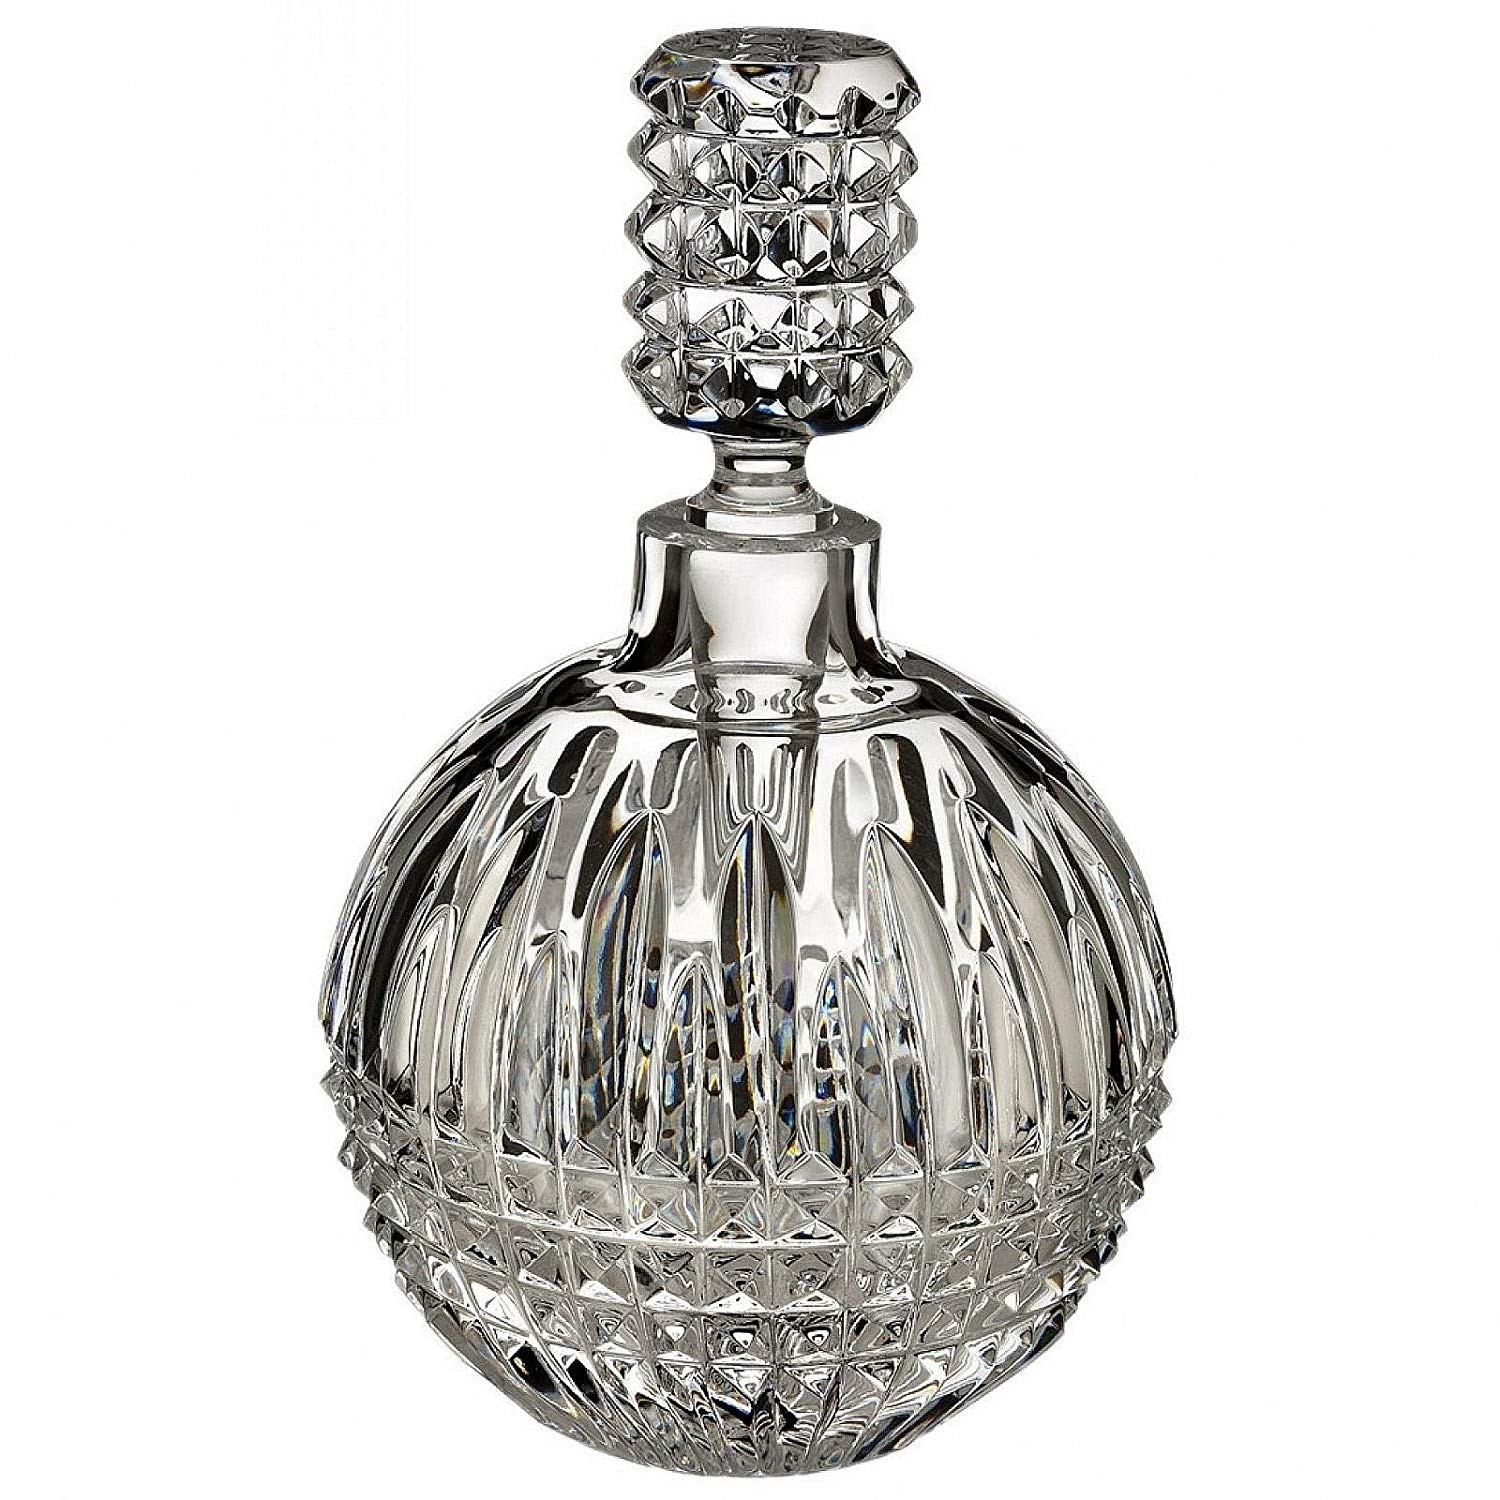 25 Spectacular Waterford Lismore Diamond 8 Vase 2024 free download waterford lismore diamond 8 vase of amazon com lismore diamond 5 25 perfume bottle home kitchen intended for 813a4xbfr2l sl1500